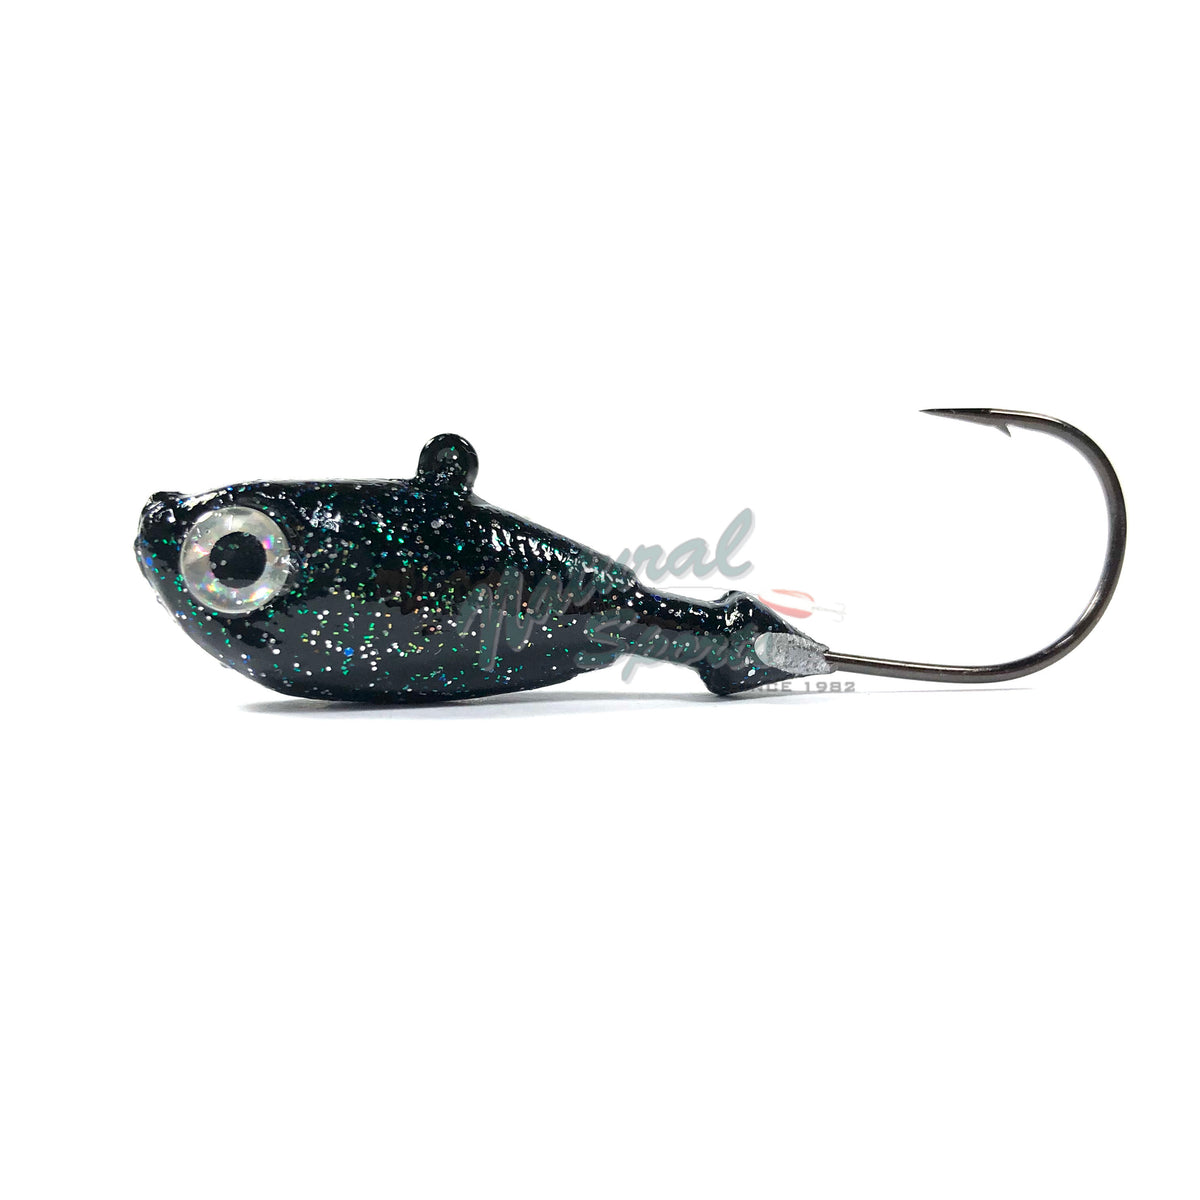 Natural Sports Minnow Jighead – Natural Sports - The Fishing Store